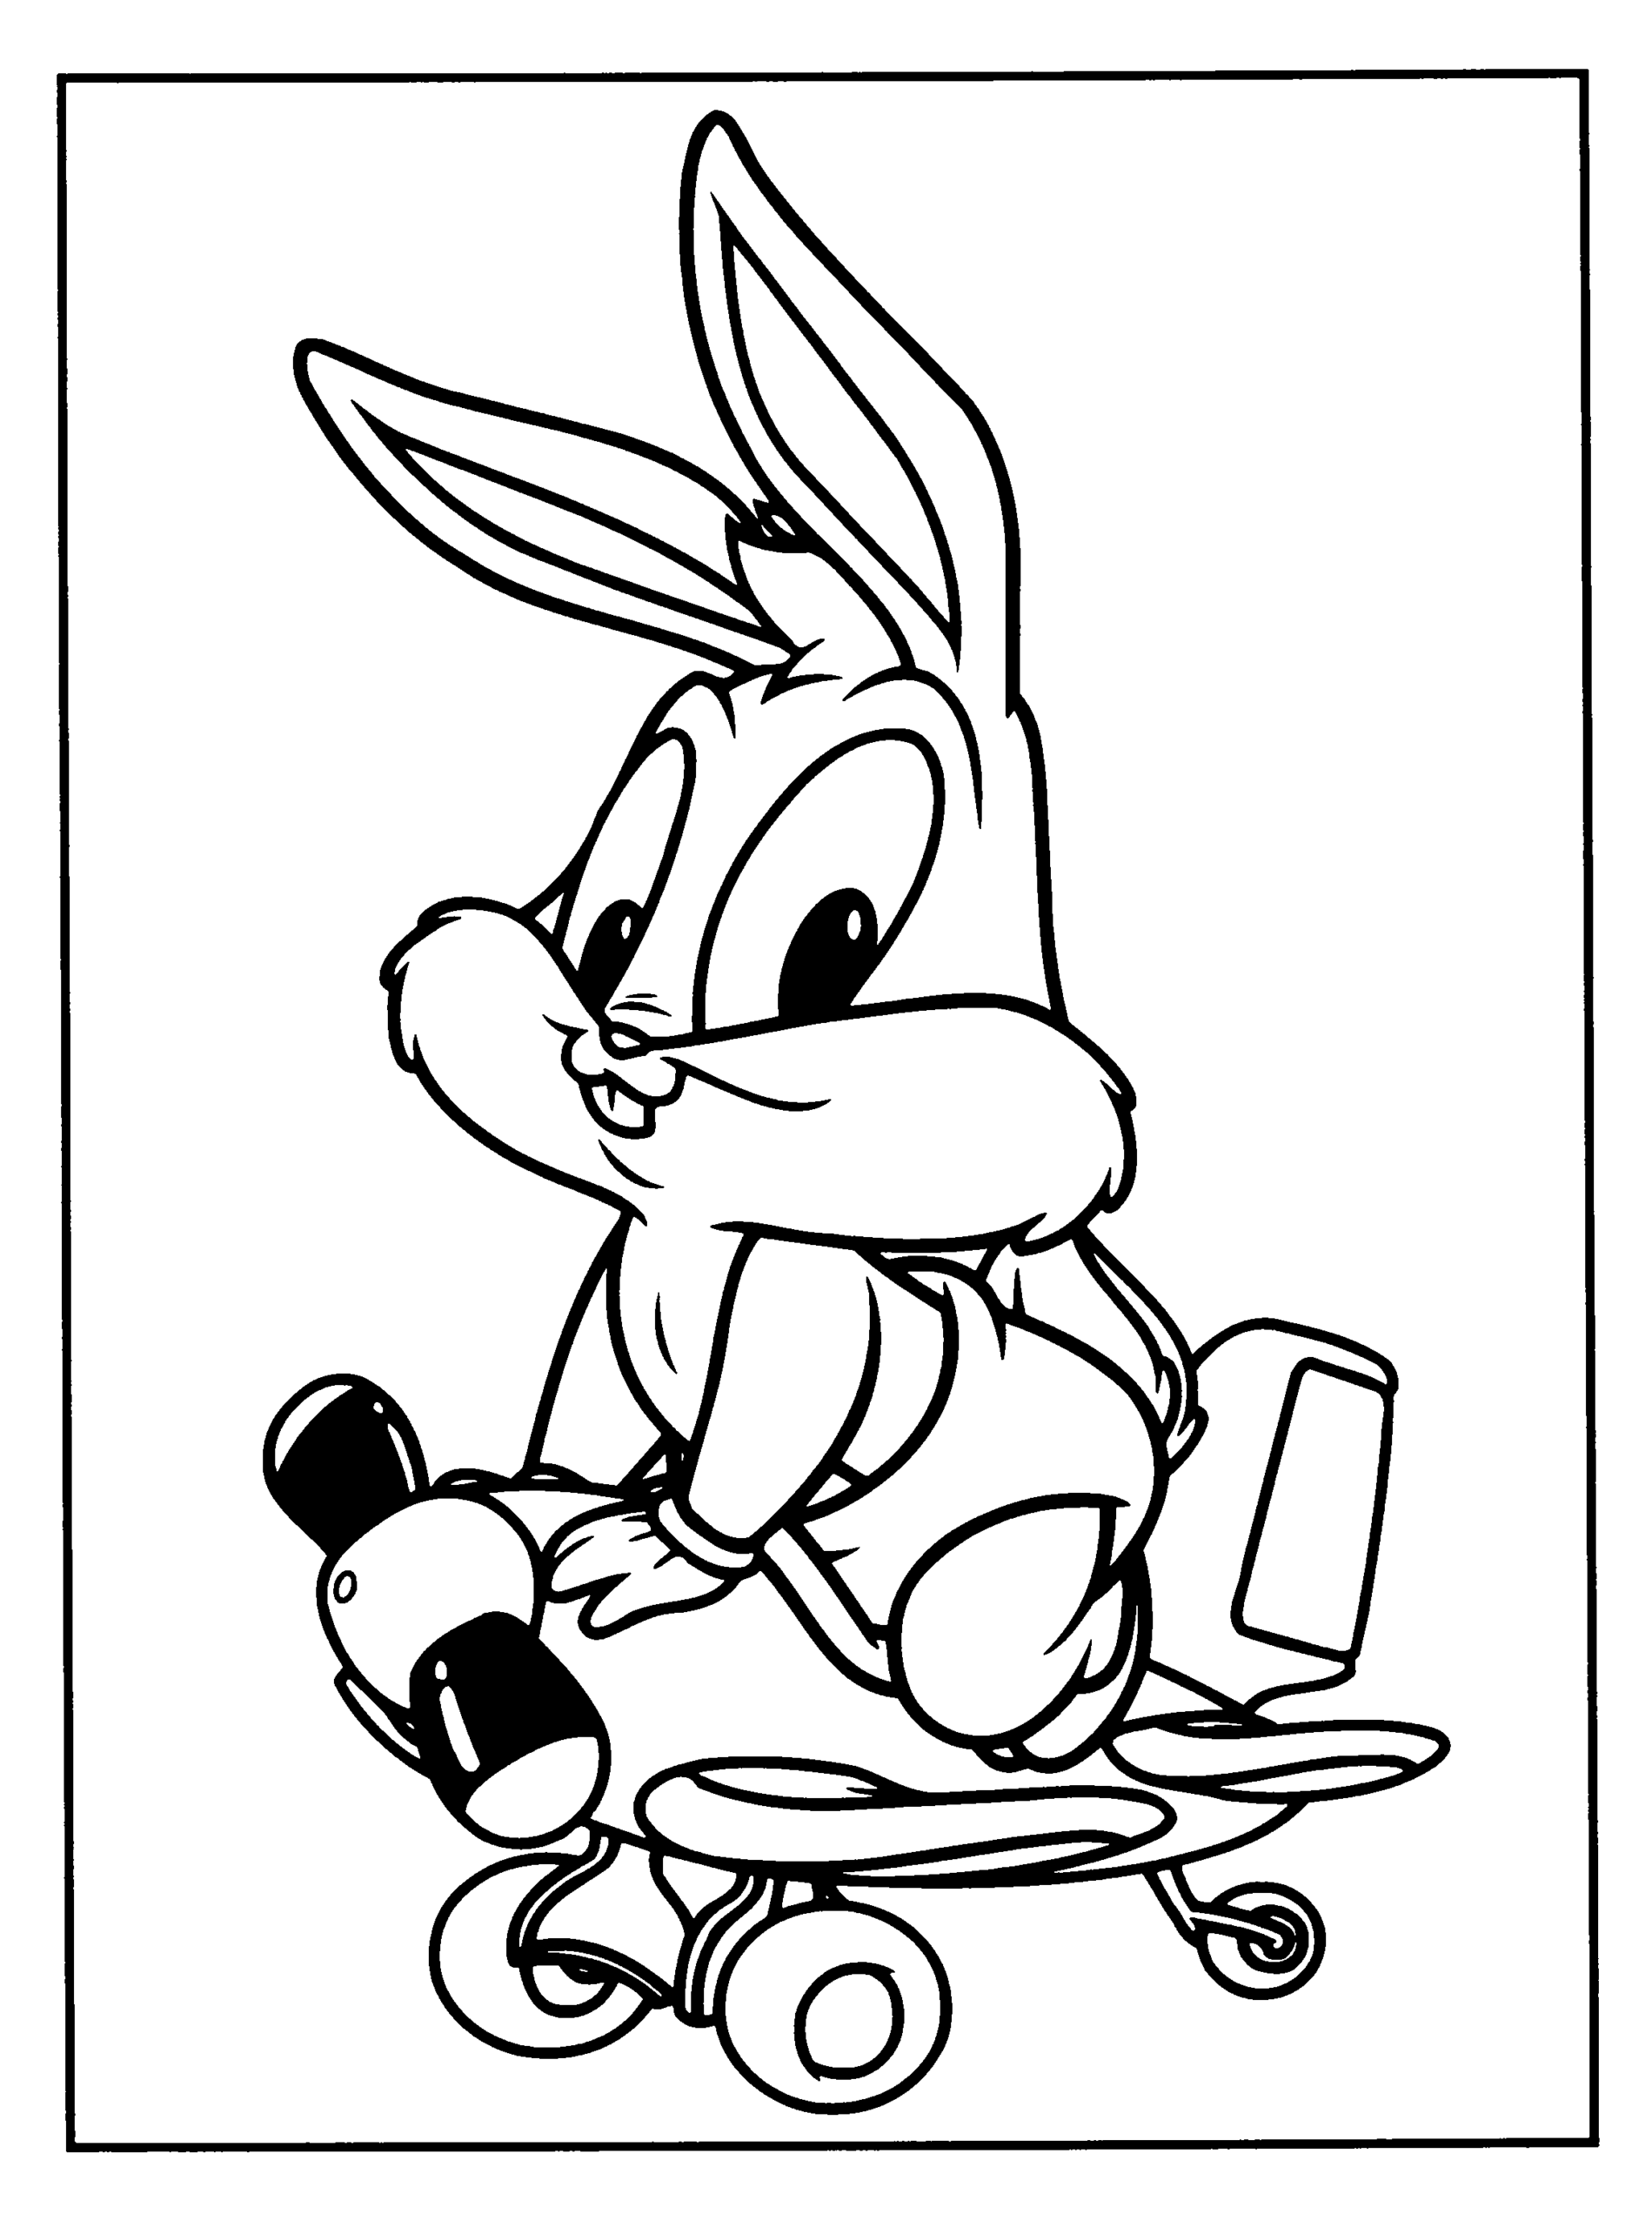 Looney Tunes Coloring Pages TV Film looney tunes 4 Printable 2020 04593 Coloring4free